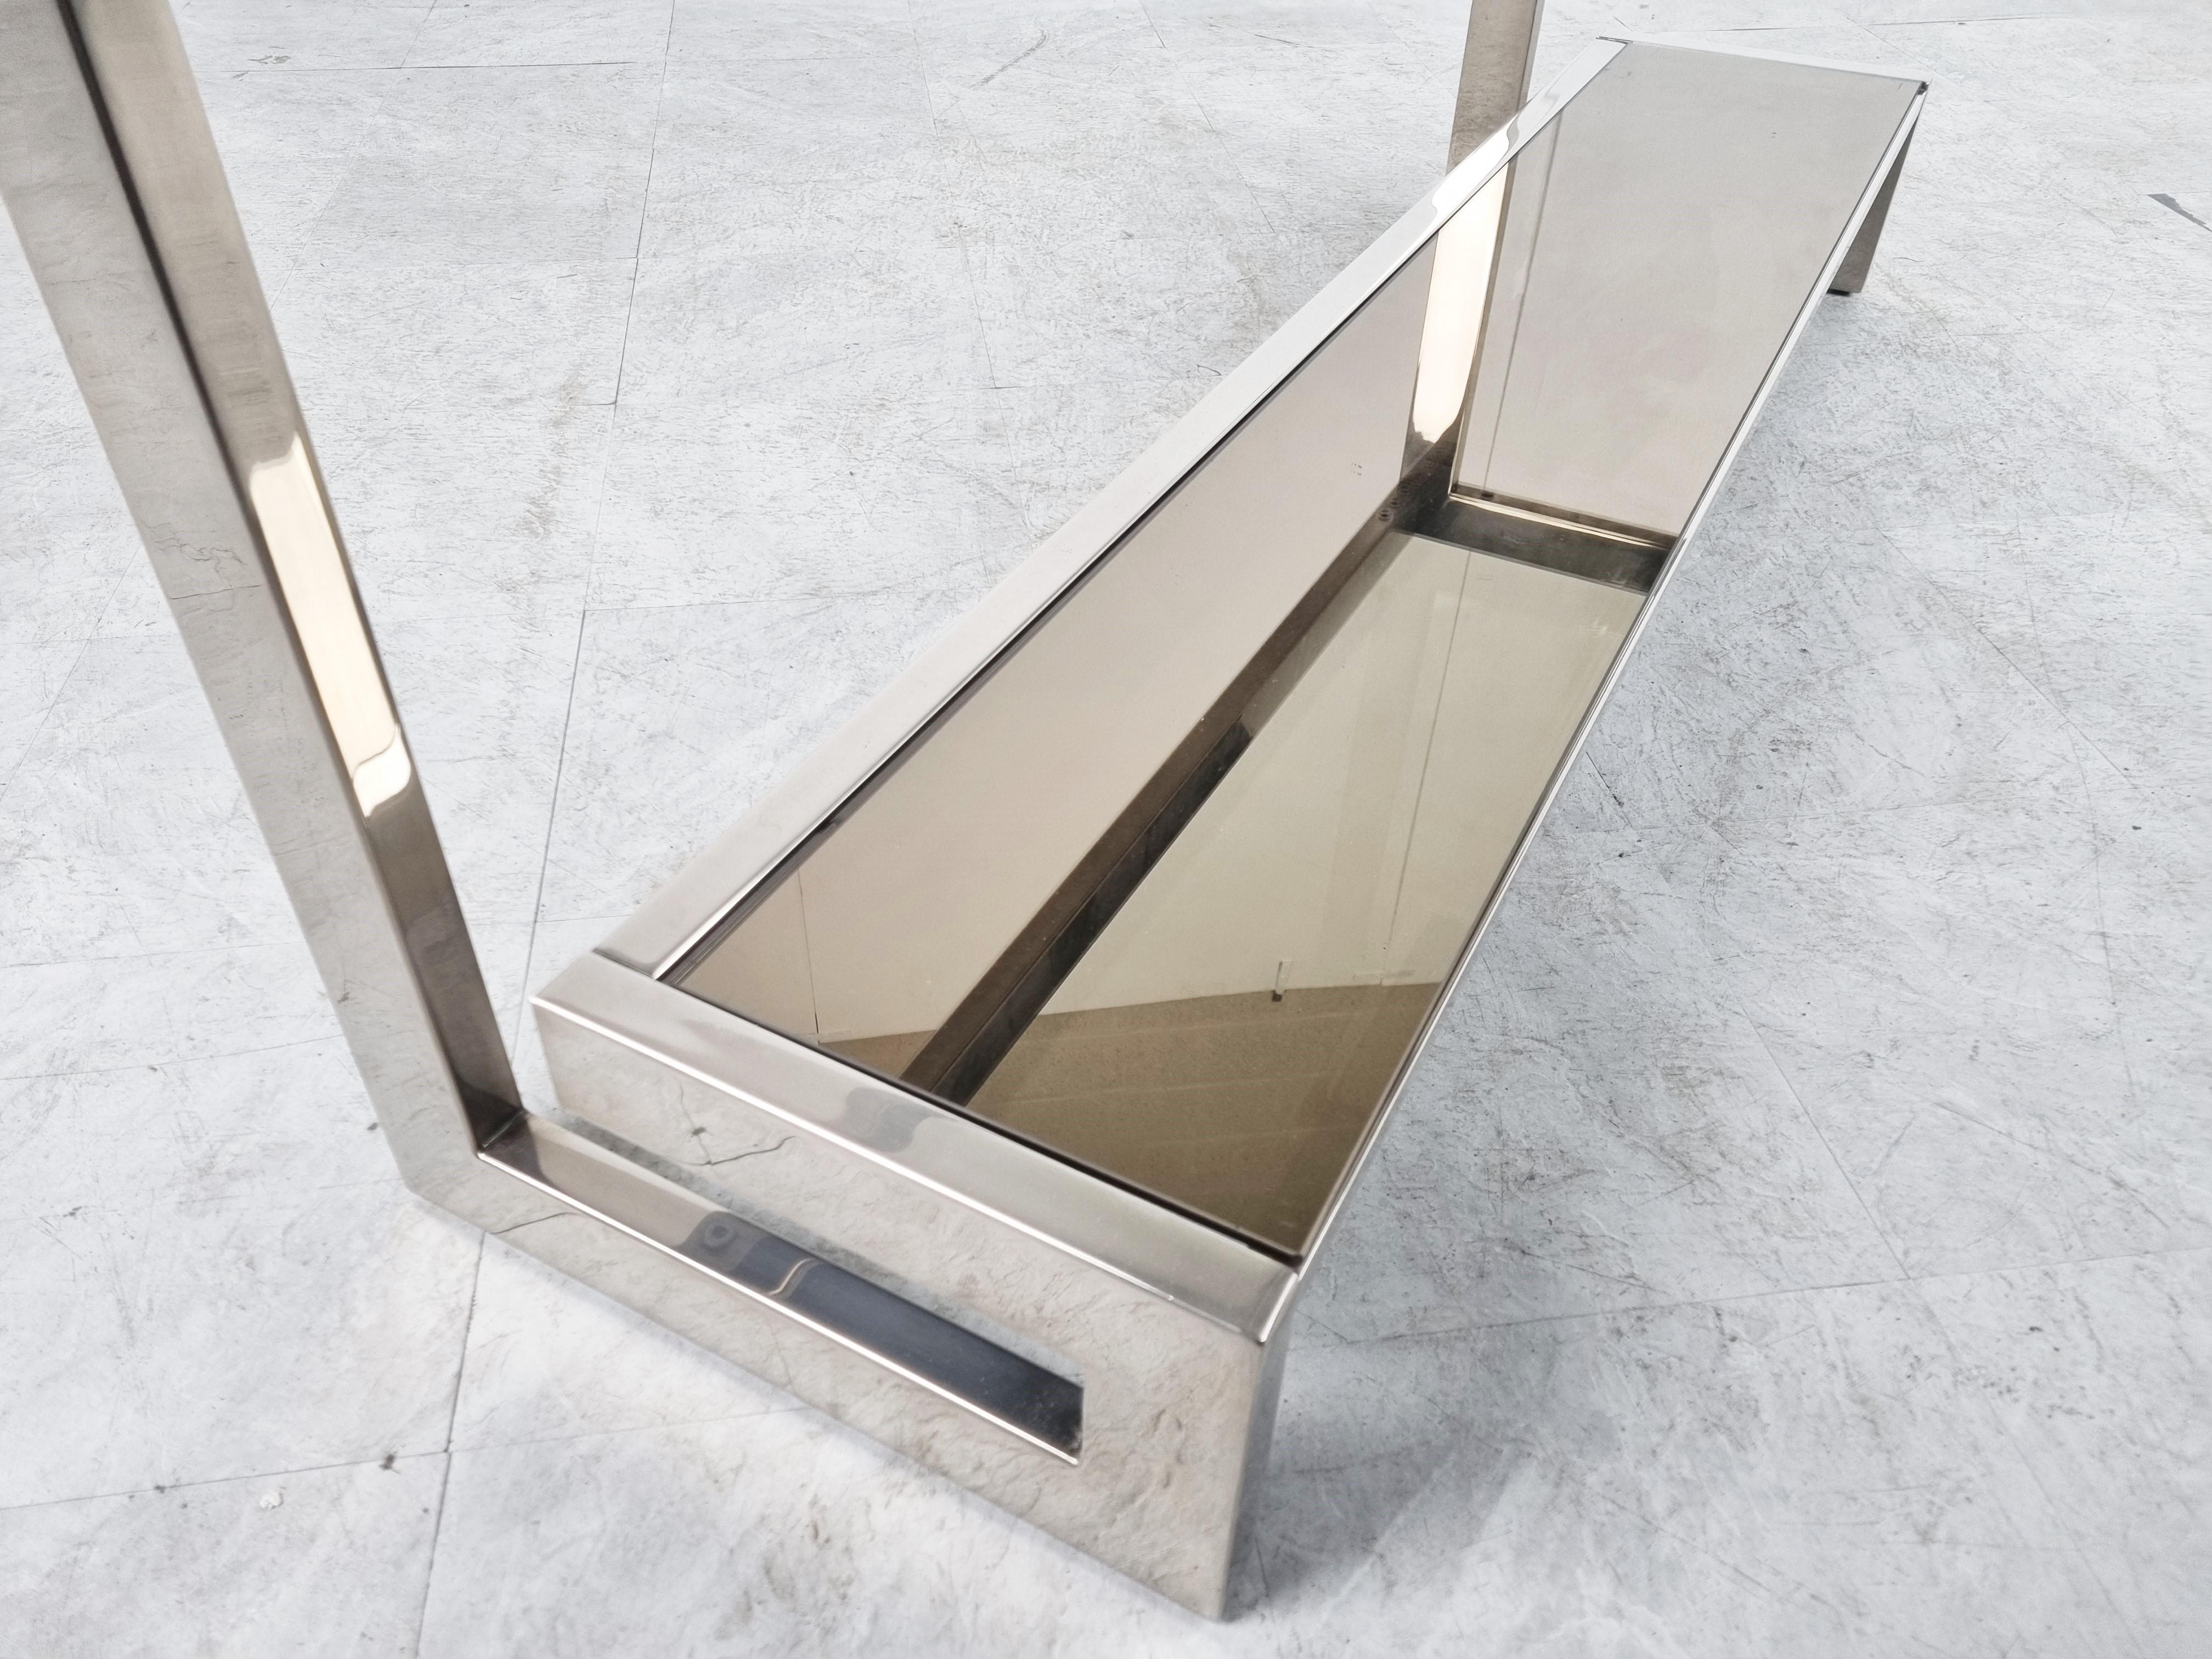 'G'-shaped console table produced by Belgochrom.

The table has mirrored and clear glass tops

Chromed metal

1970s - Belgium

Measures: height: 74cm/29.13